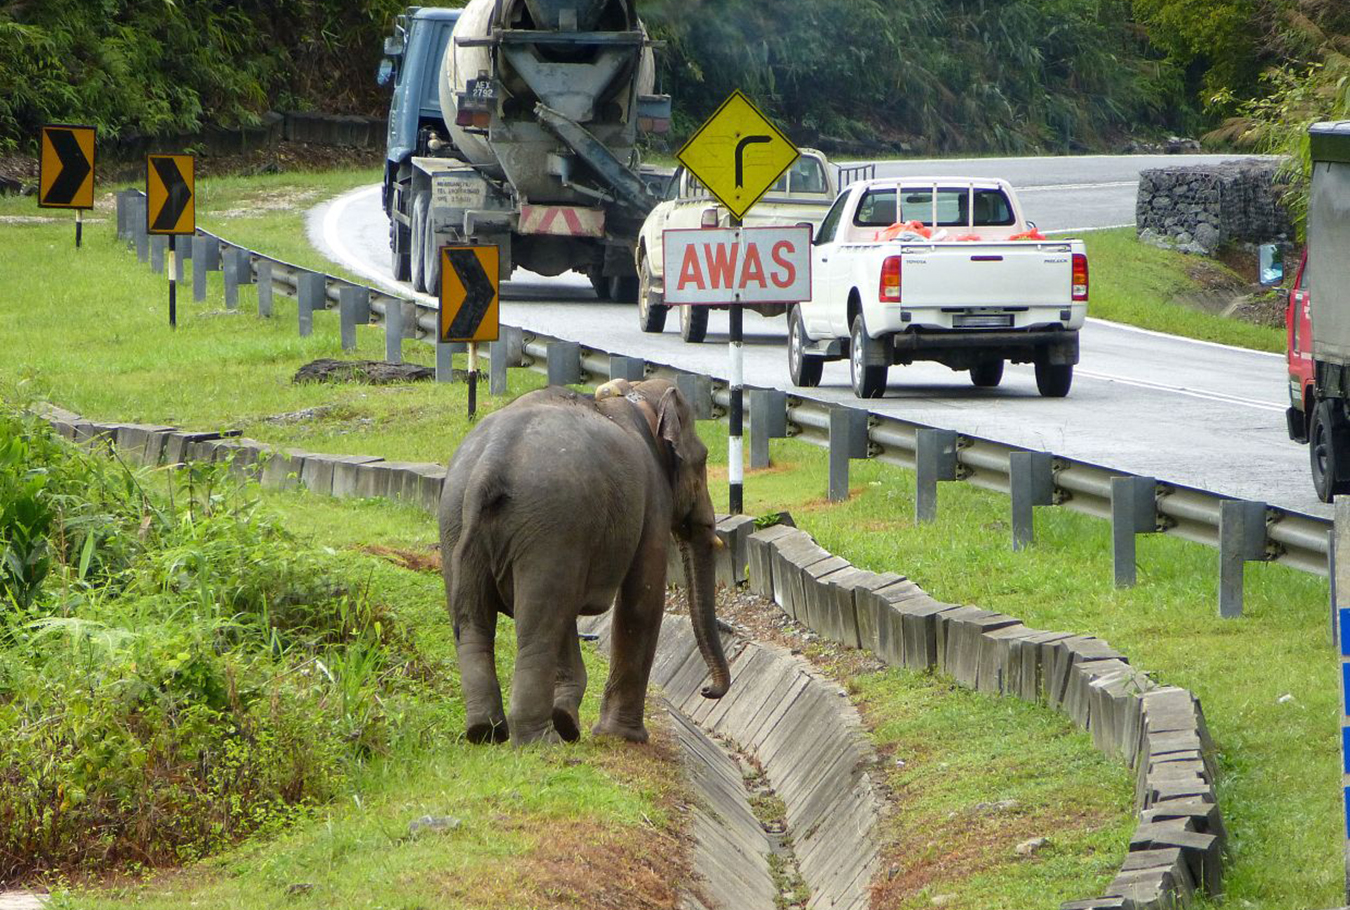 Human-Wildlife conflicts are on the rise in Malaysia